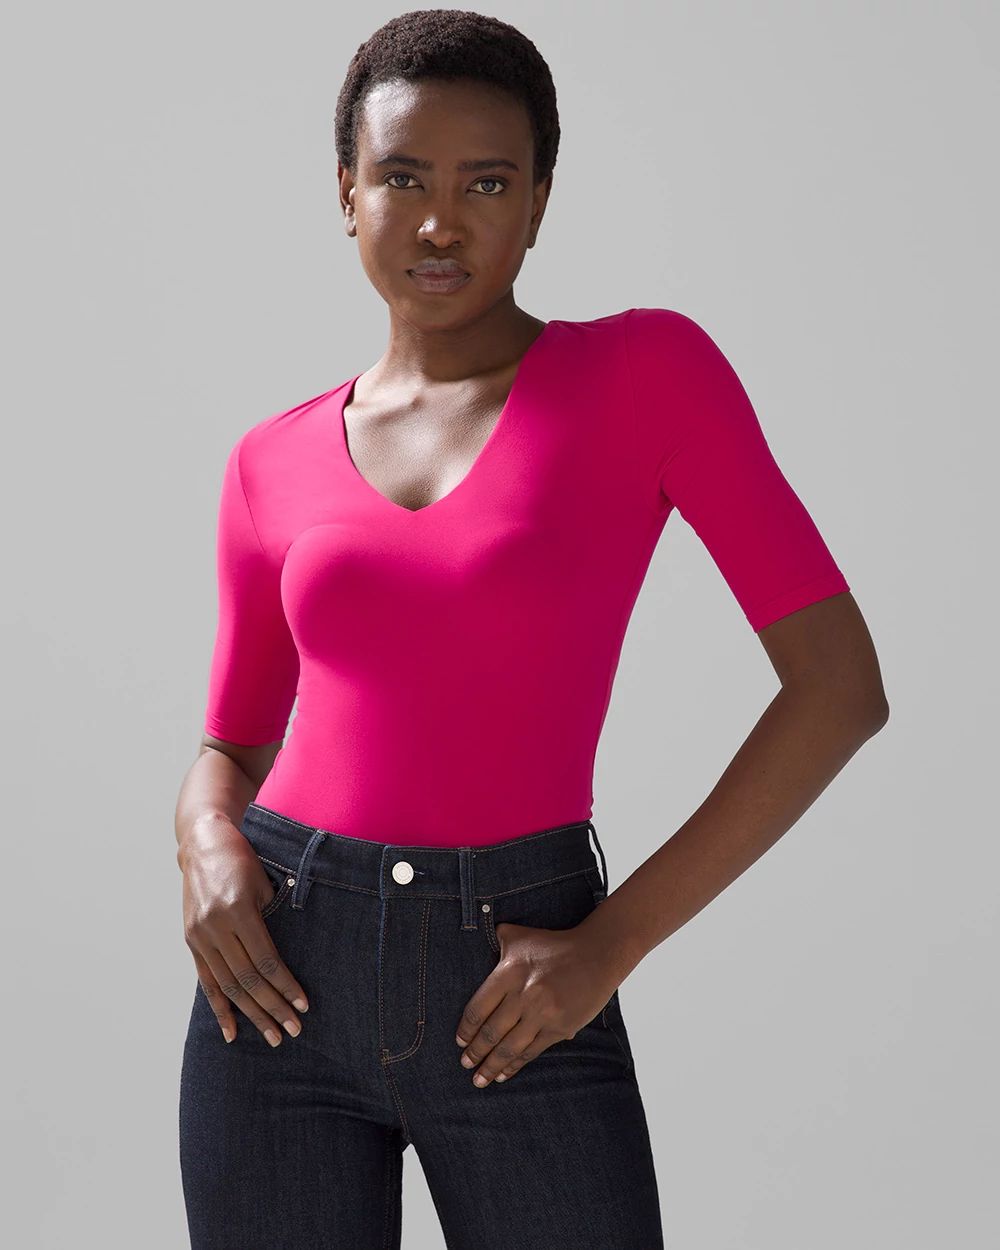 WHBM® FORME Elbow-Sleeve Top